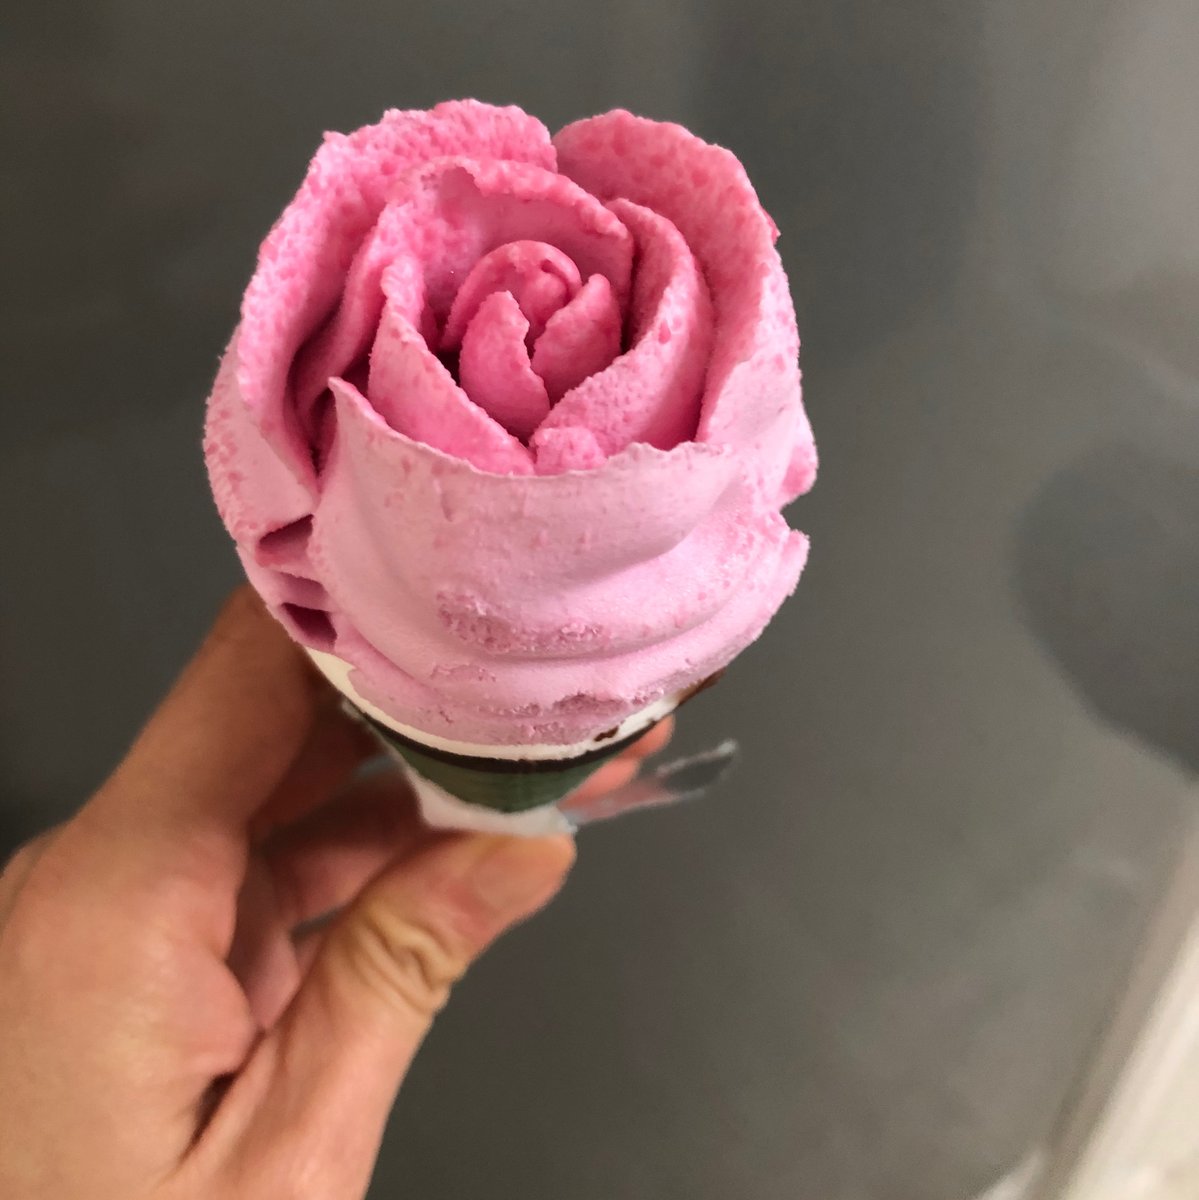 Strawberry rose ice cream cones from Co-Ops. Tasty and beautifully presented. Creativity is everywhere in our daily life, but we often take it for granted. #icecreamcones #strawberryroseicecream #coops #supermarket #creativity #creative #creativityinlife